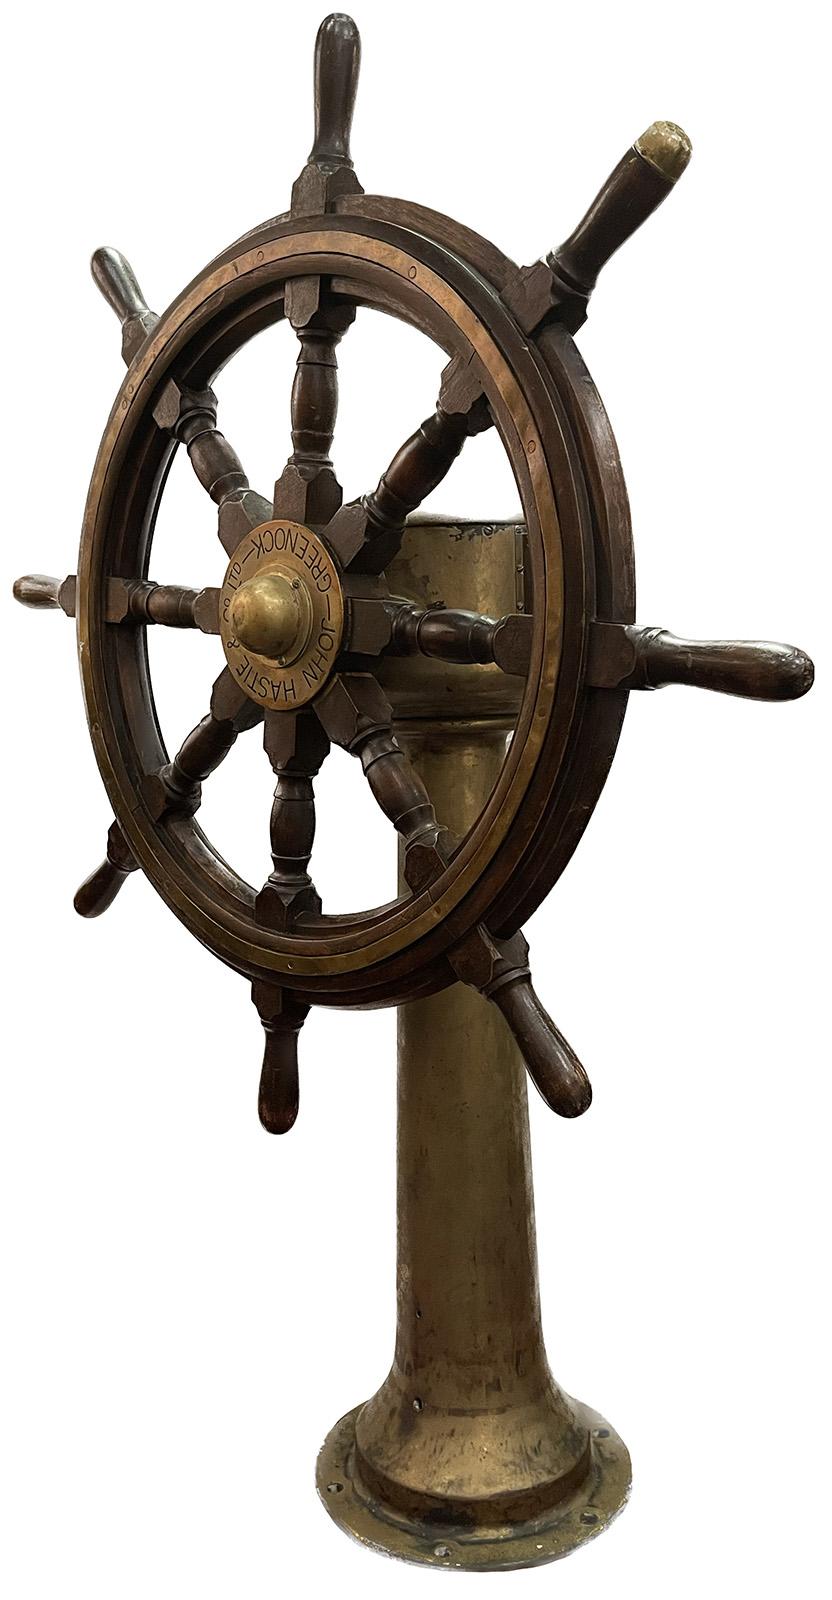 A late 19th century John Hastie & Co. Ltd. Greenock ship's wheel with stand. 

Dimensions: 52.25